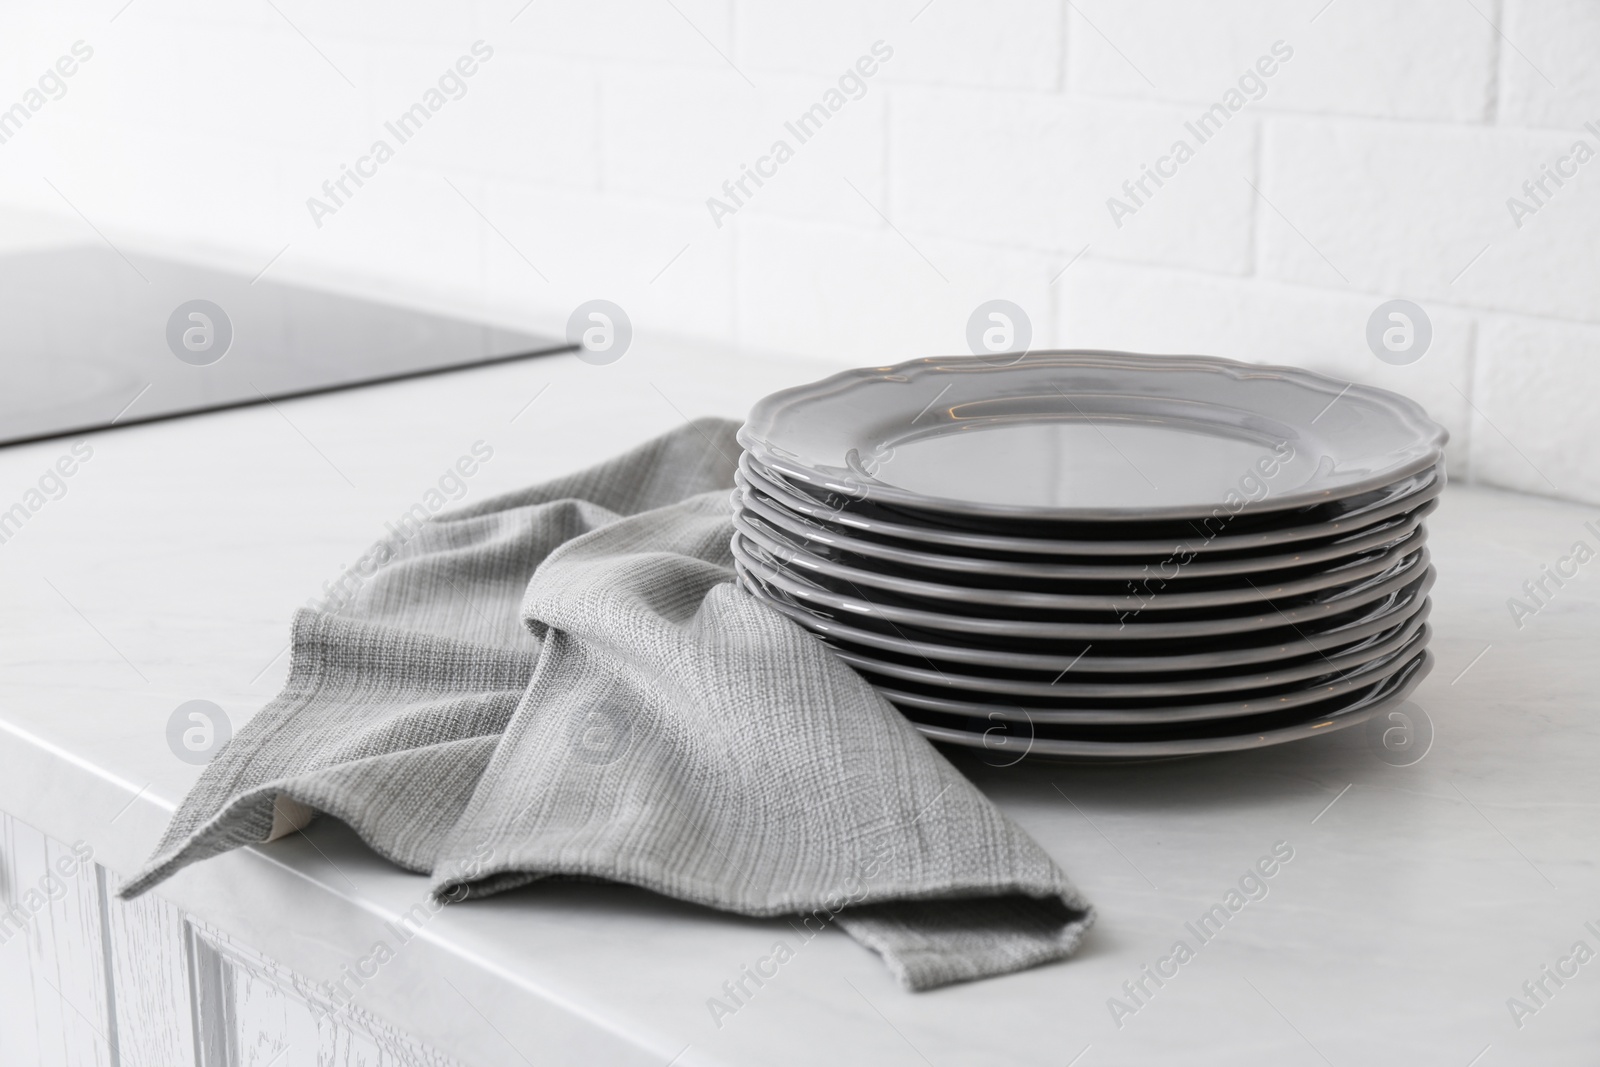 Photo of Clean grey towel and stack of plates on kitchen counter